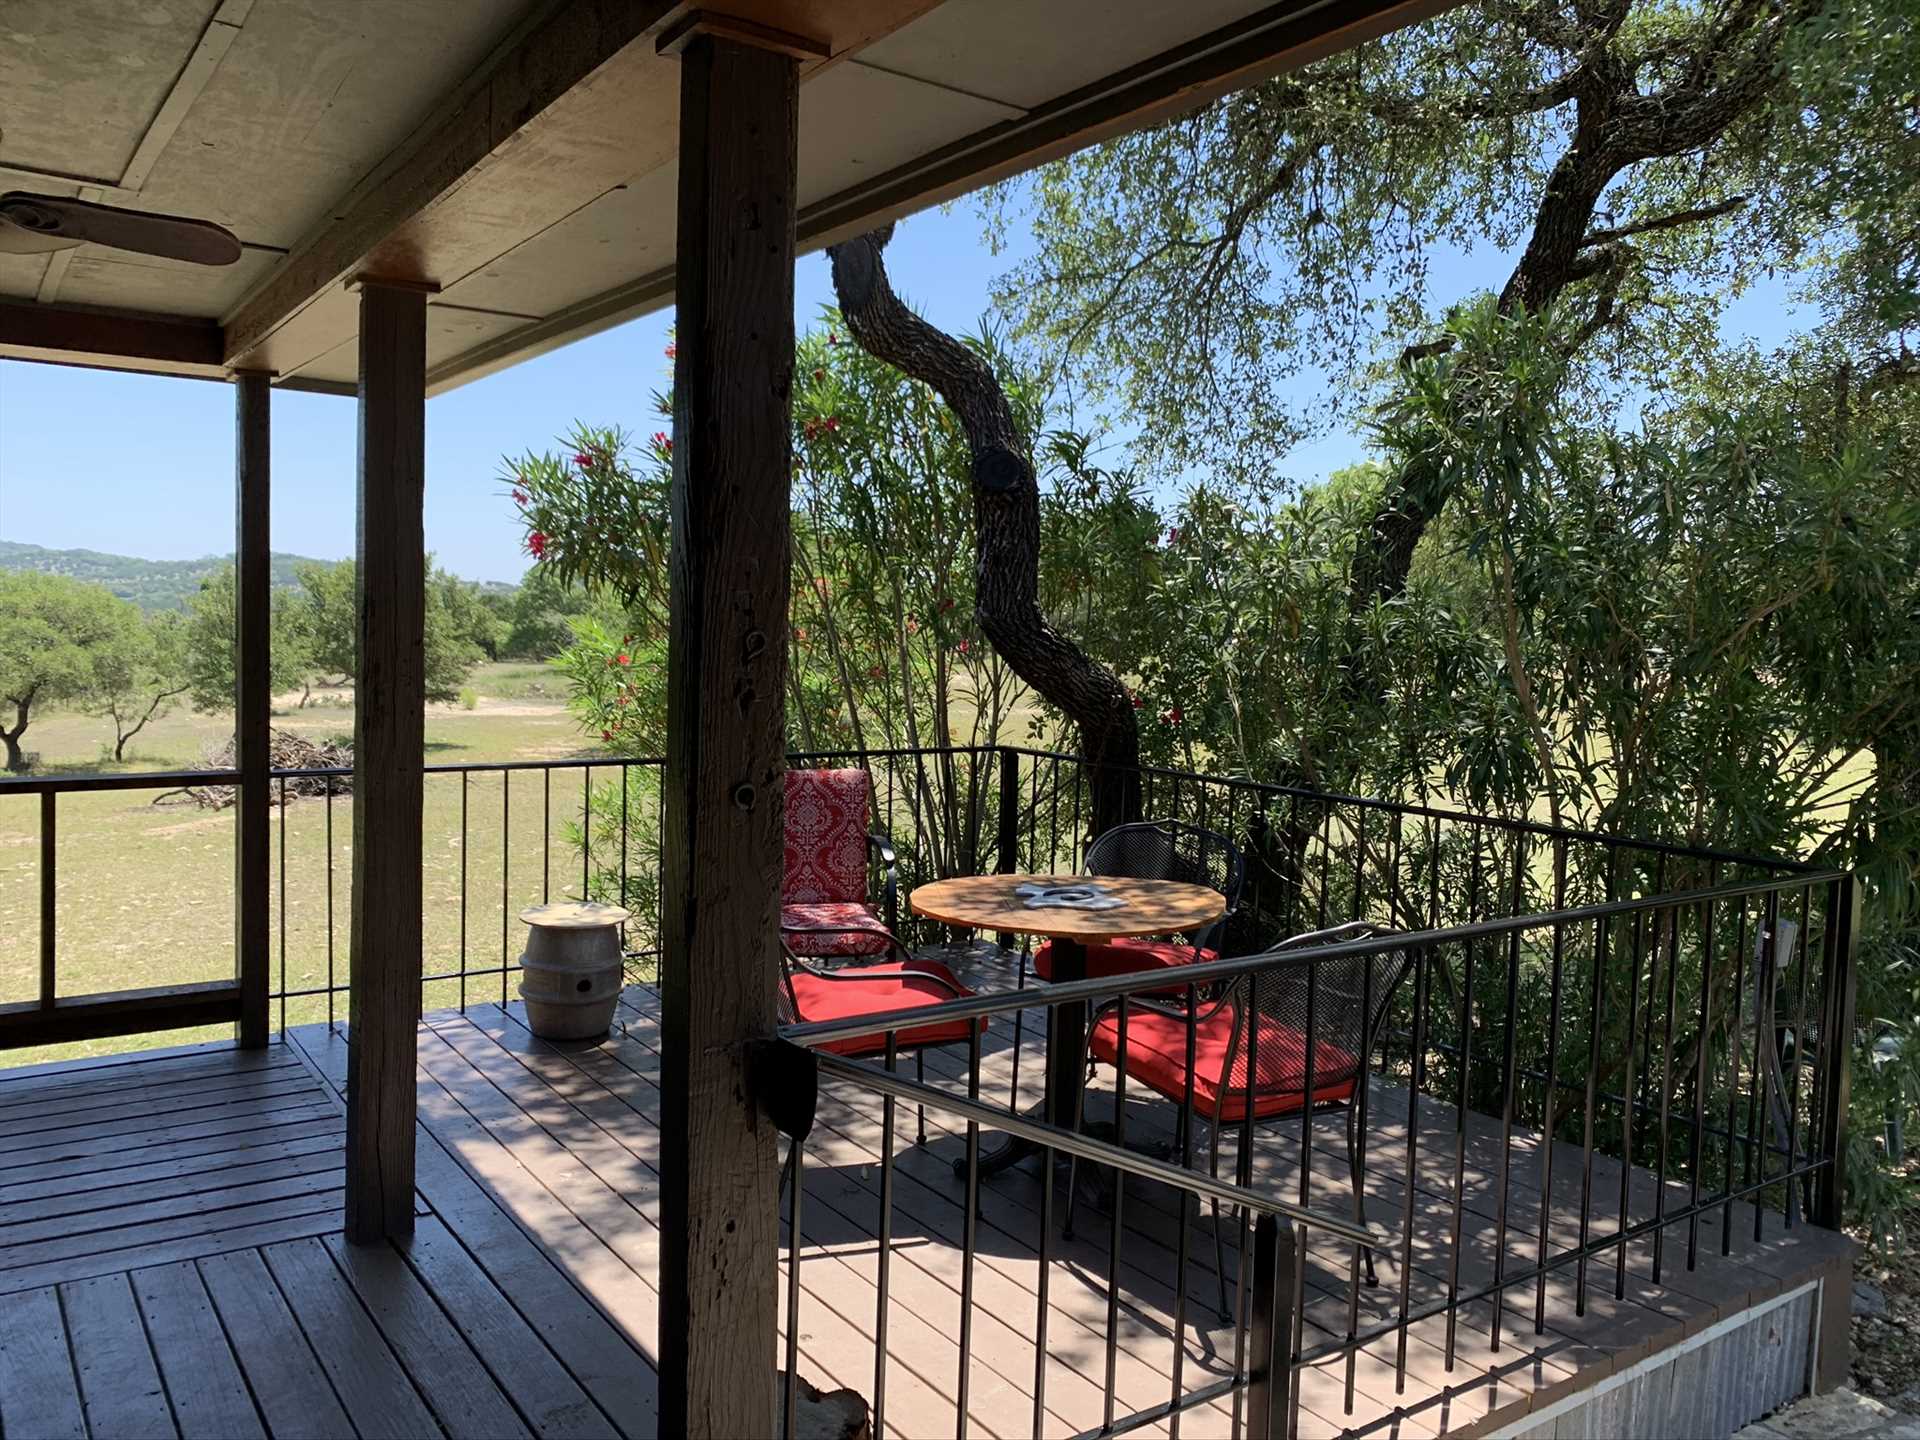                                                 Wine and dine on the wonderful, tree-shaded outdoor dining patio!